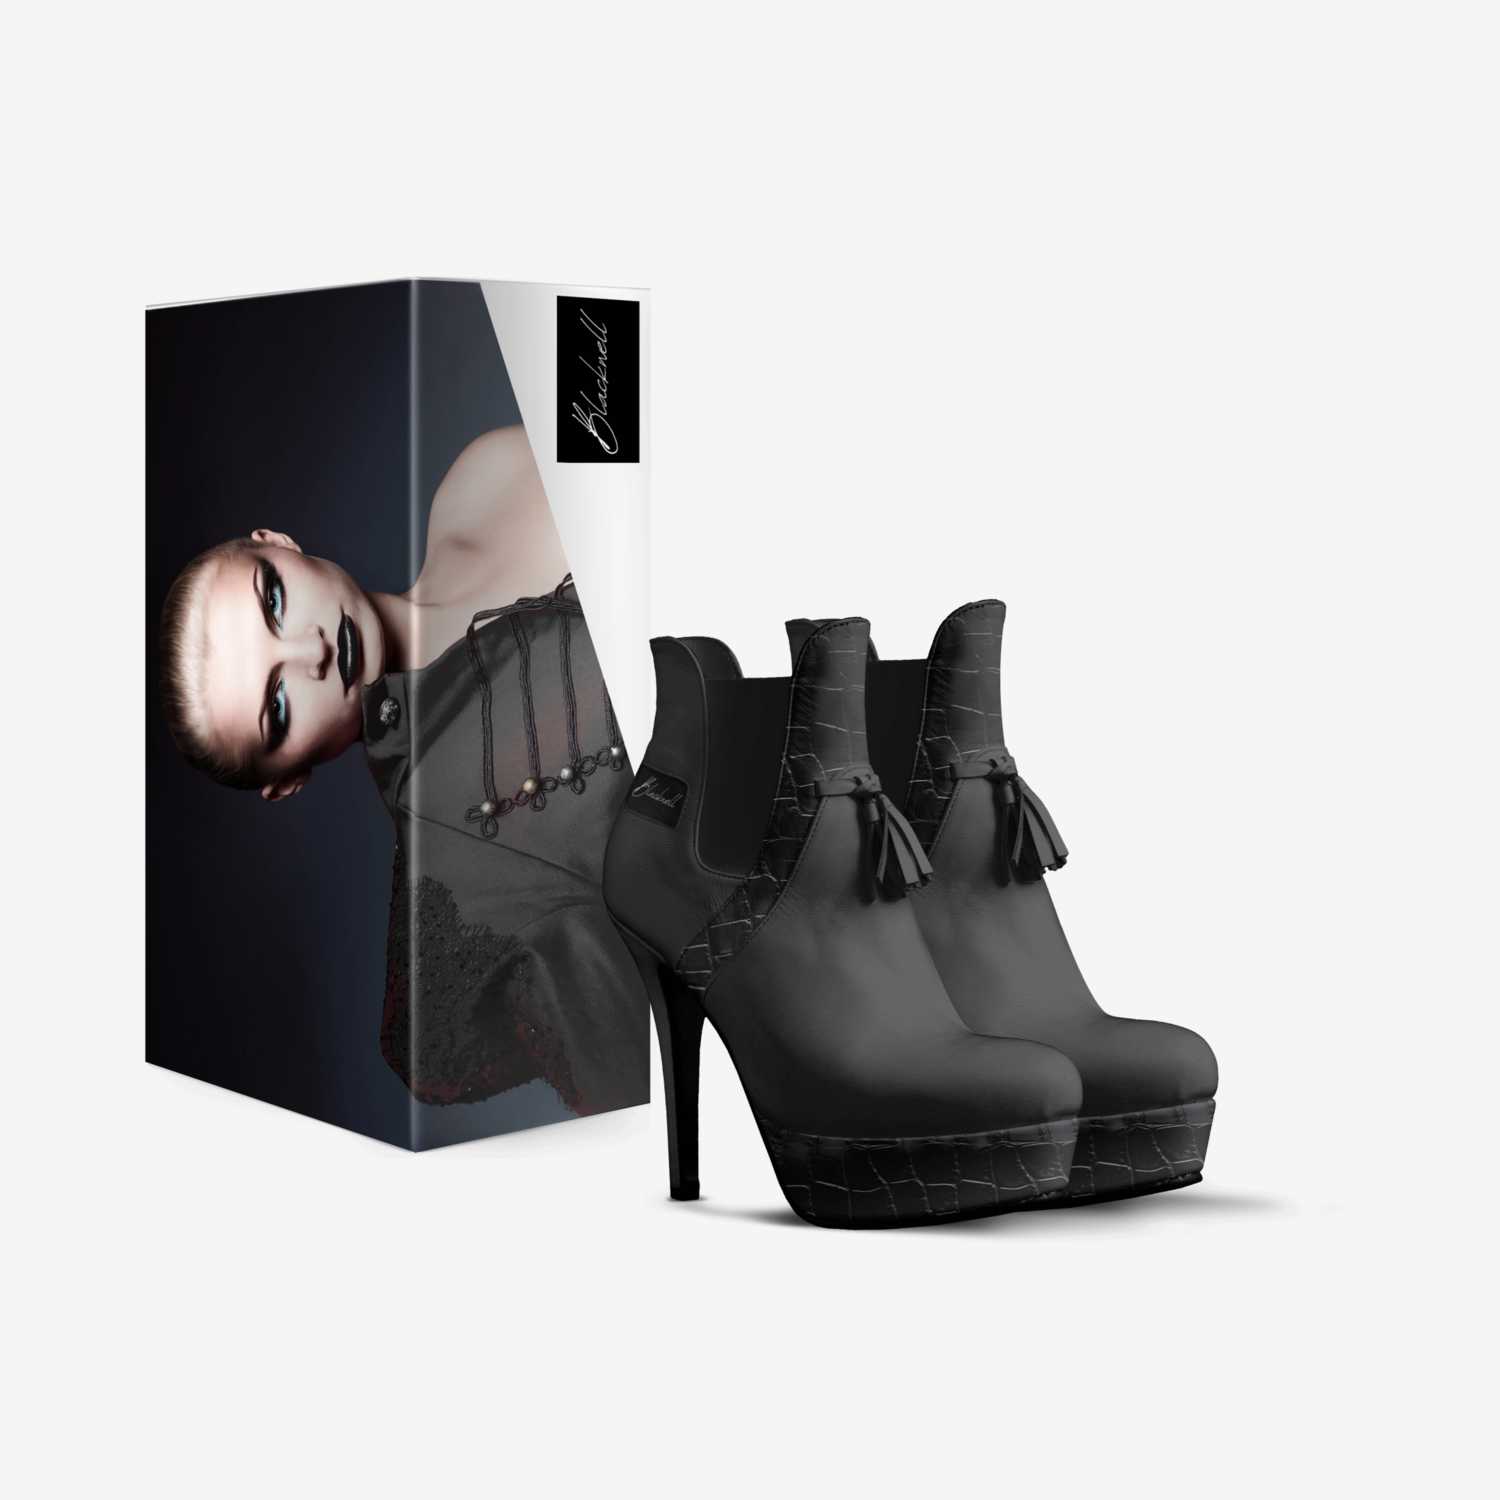 Naomi custom made in Italy shoes by Lawrence Blackwell | Box view